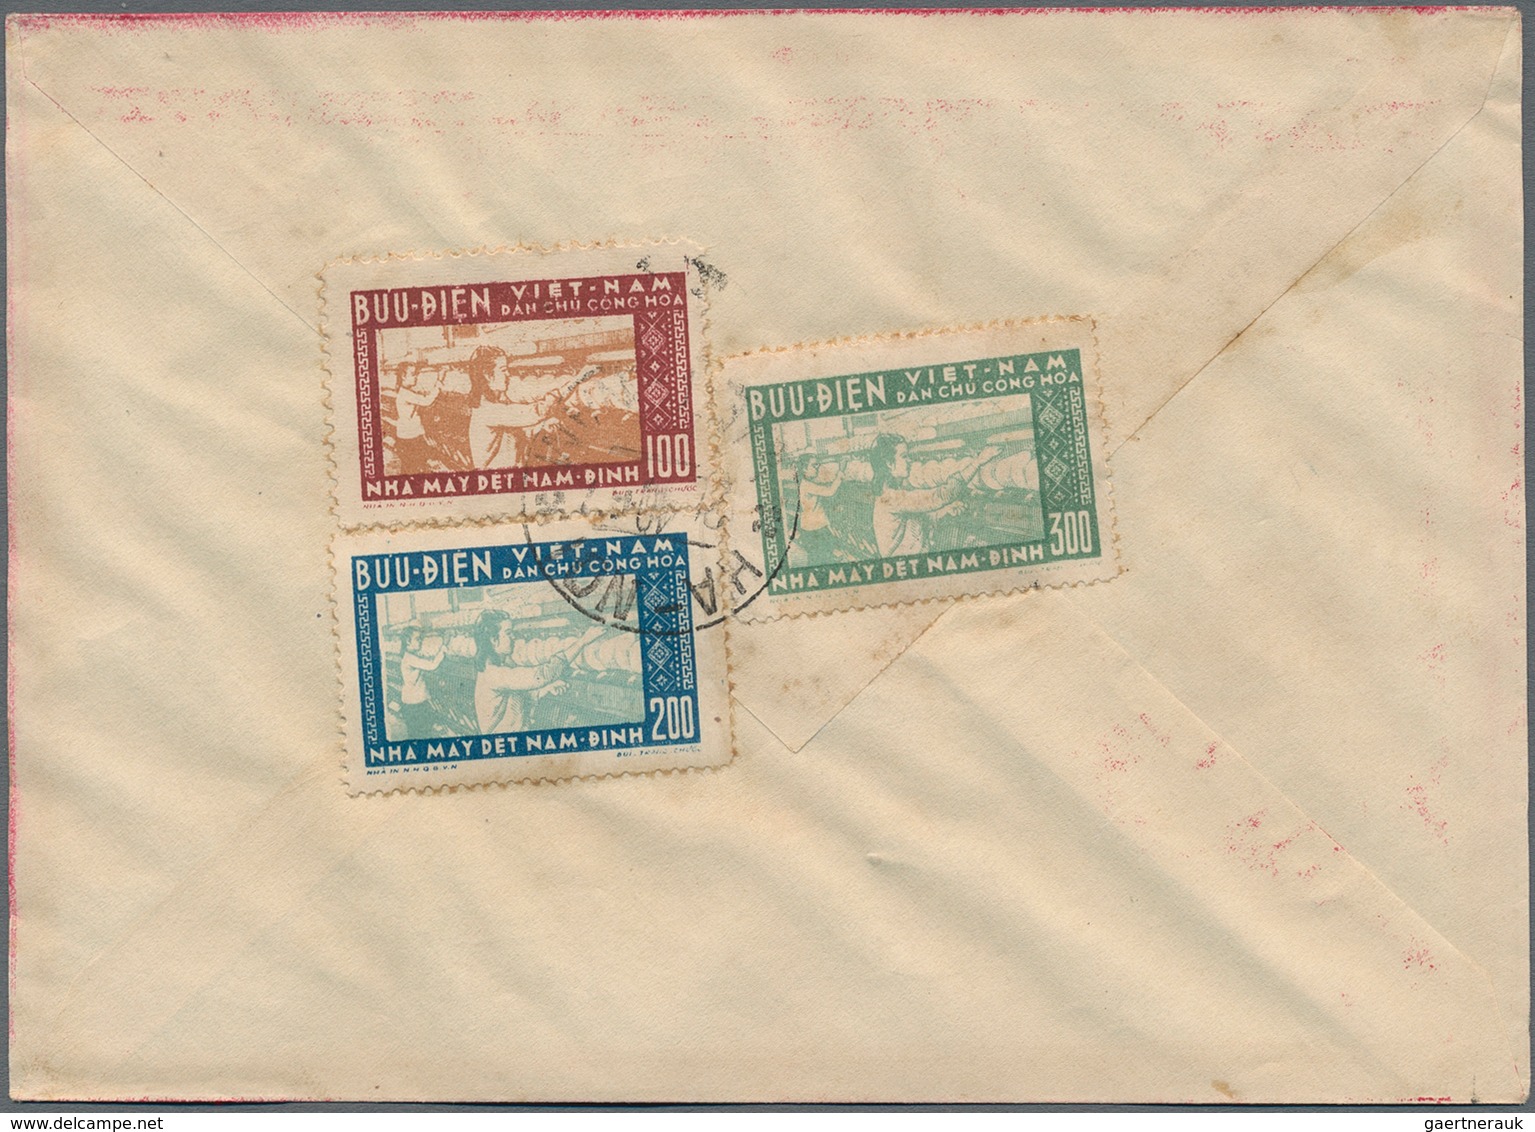 Vietnam-Nord (1945-1975): 1957. Nice Three Color Mixed Franking On A Decorated Envelope With Michel - Vietnam